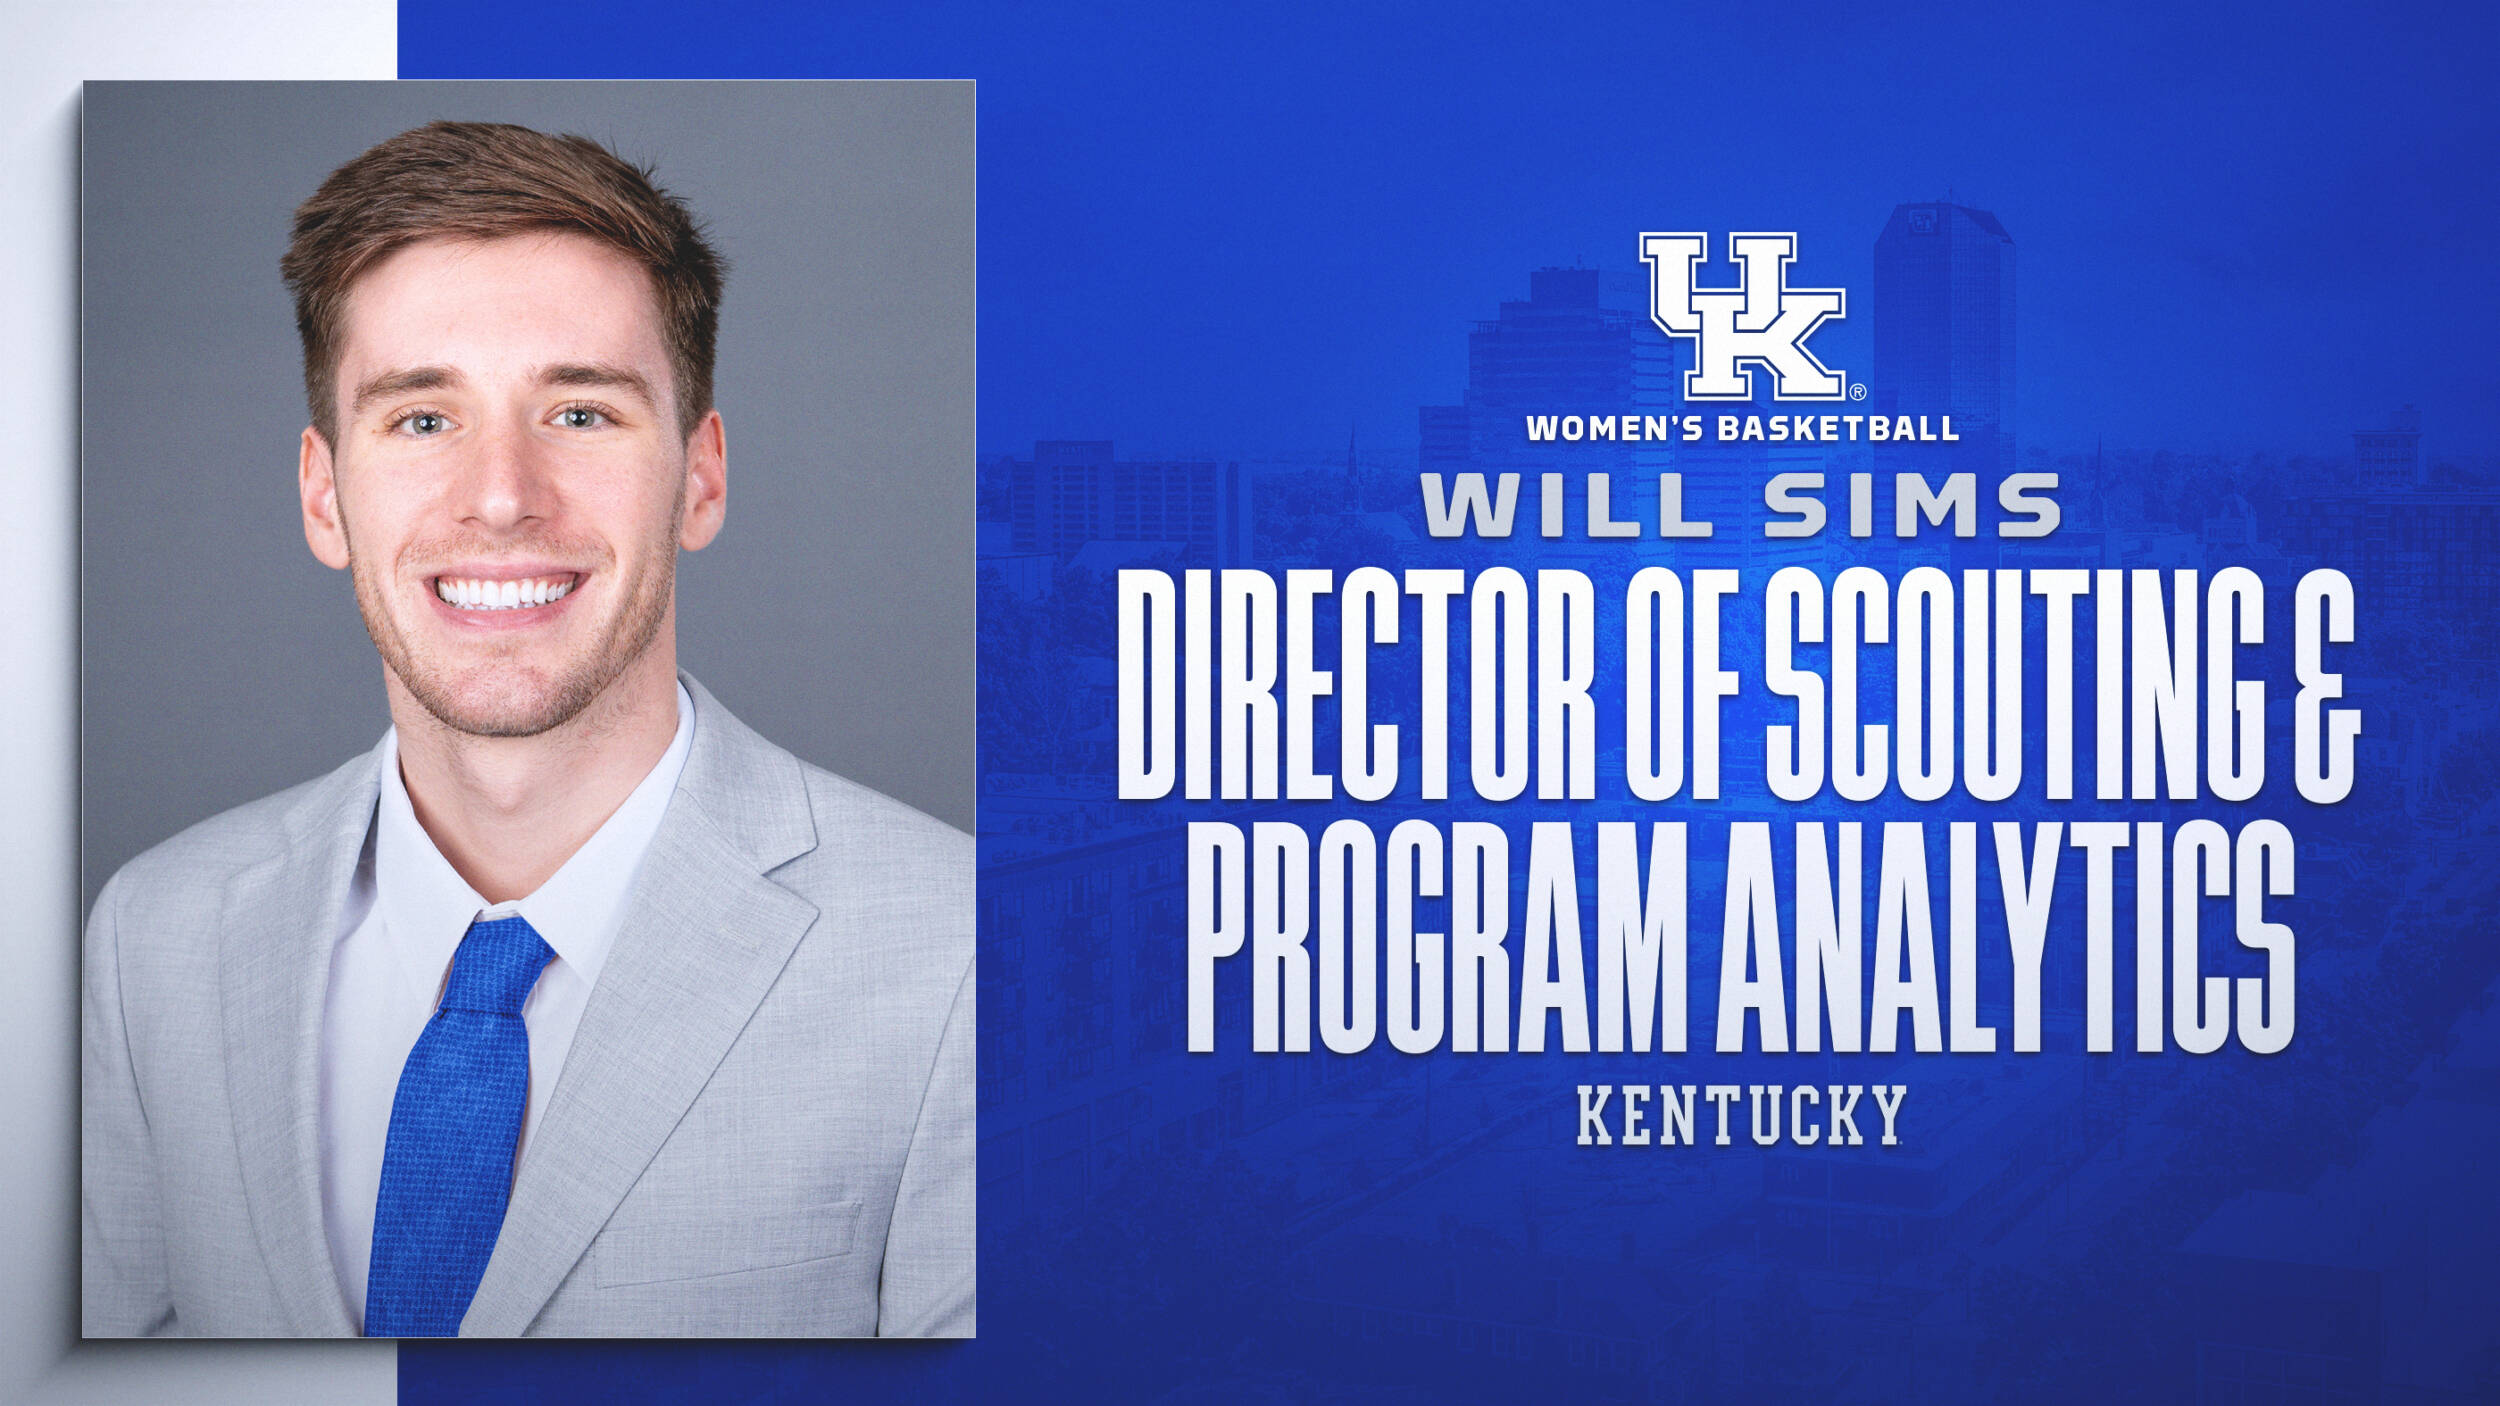 Kenny Brooks Has Hired Will Sims as the Director of Scouting and Program Analytics